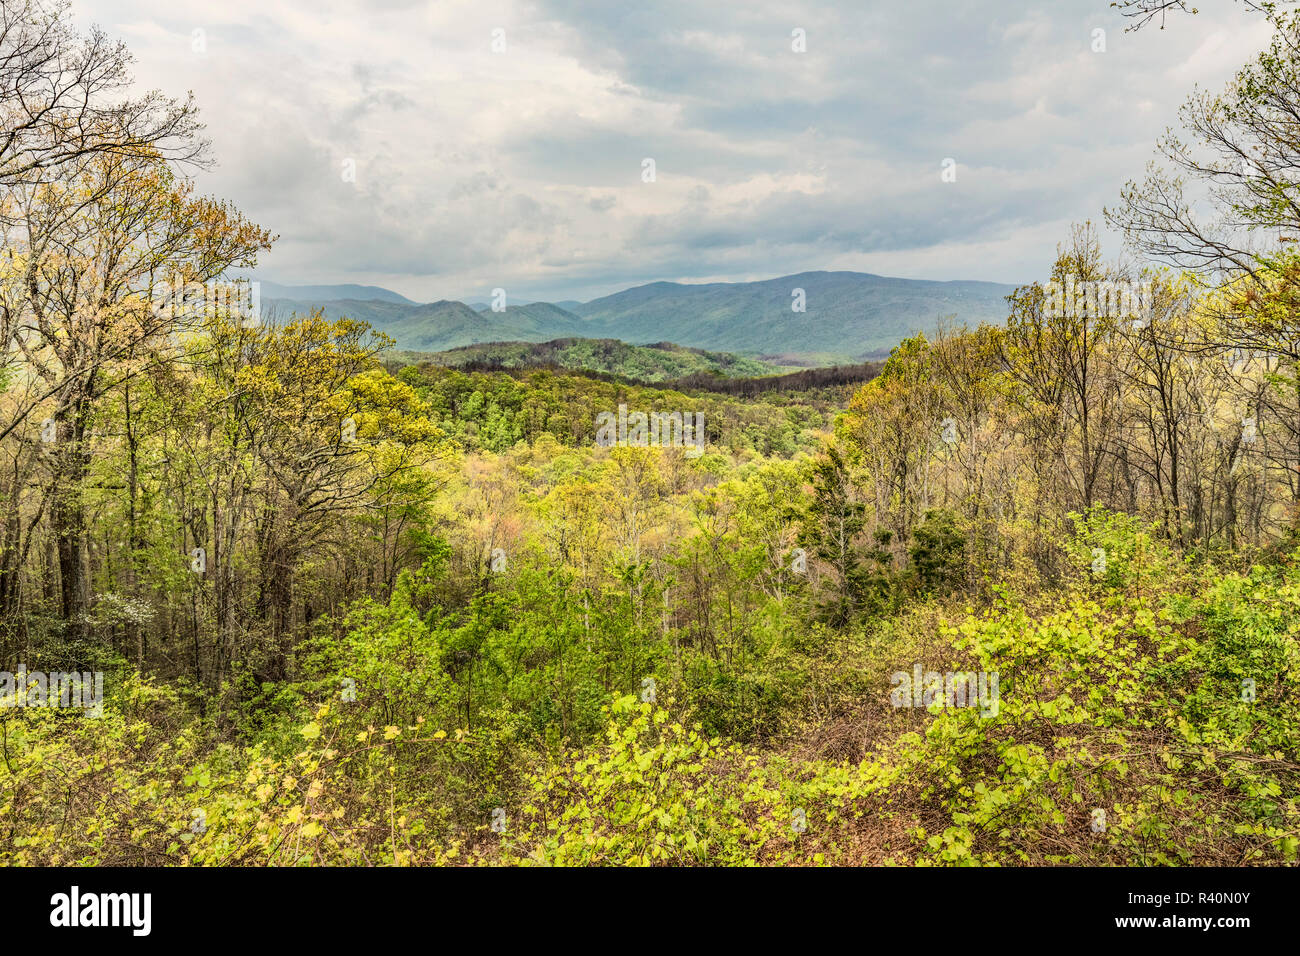 Spring view from Roaring Fork Motor Nature Trail, Great Smoky Mountains National Park, Tennessee Stock Photo